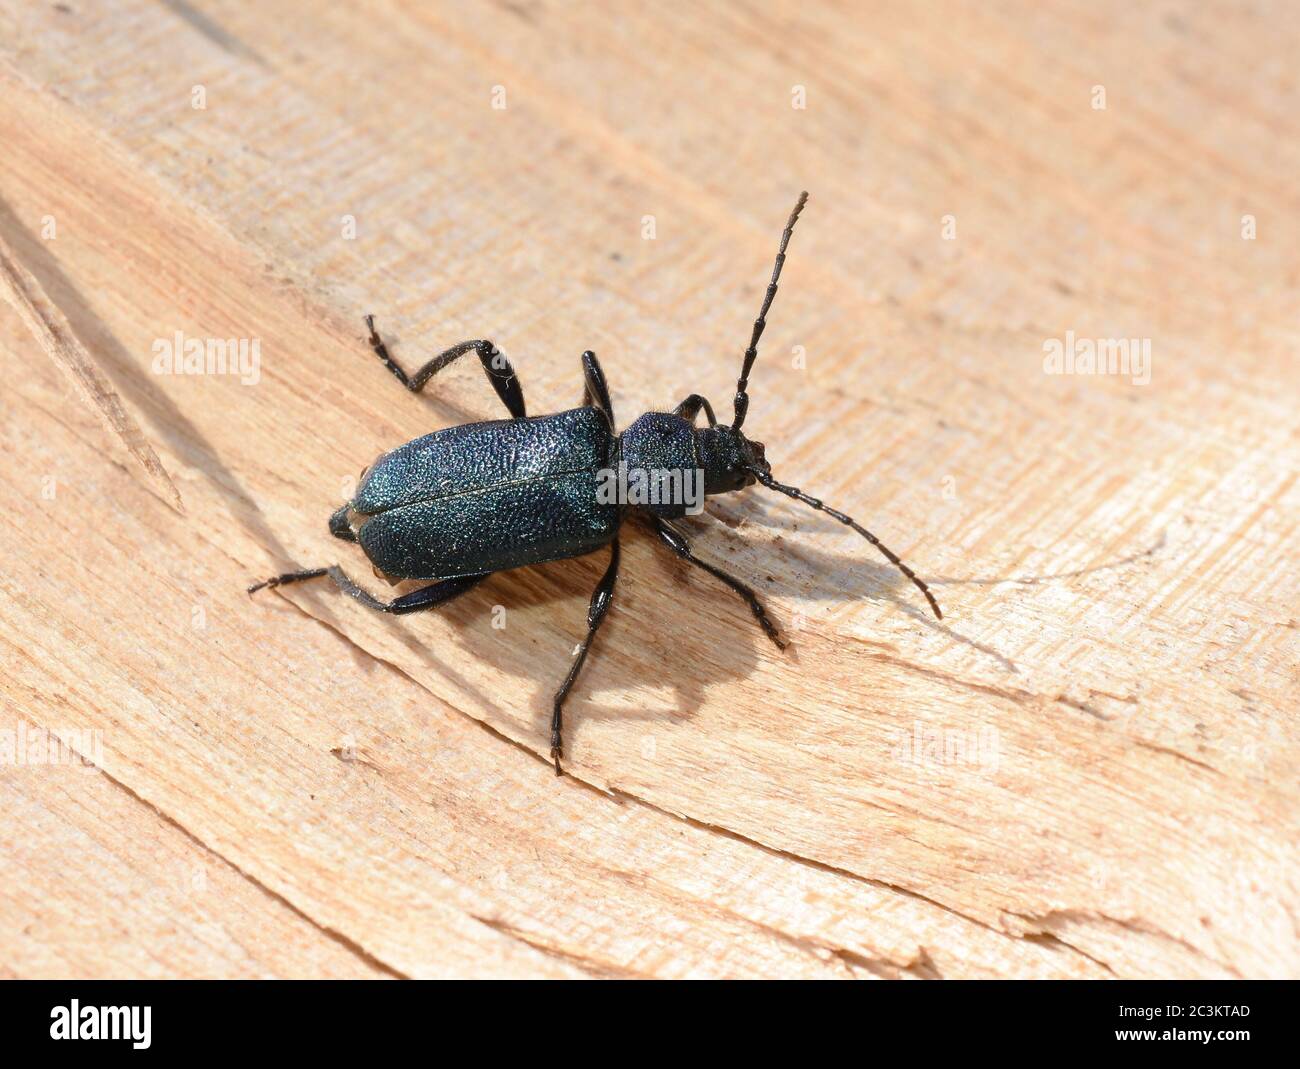 The metallic blue and violet longhorn beetle Callidium violaceum on a piece of wood Stock Photo